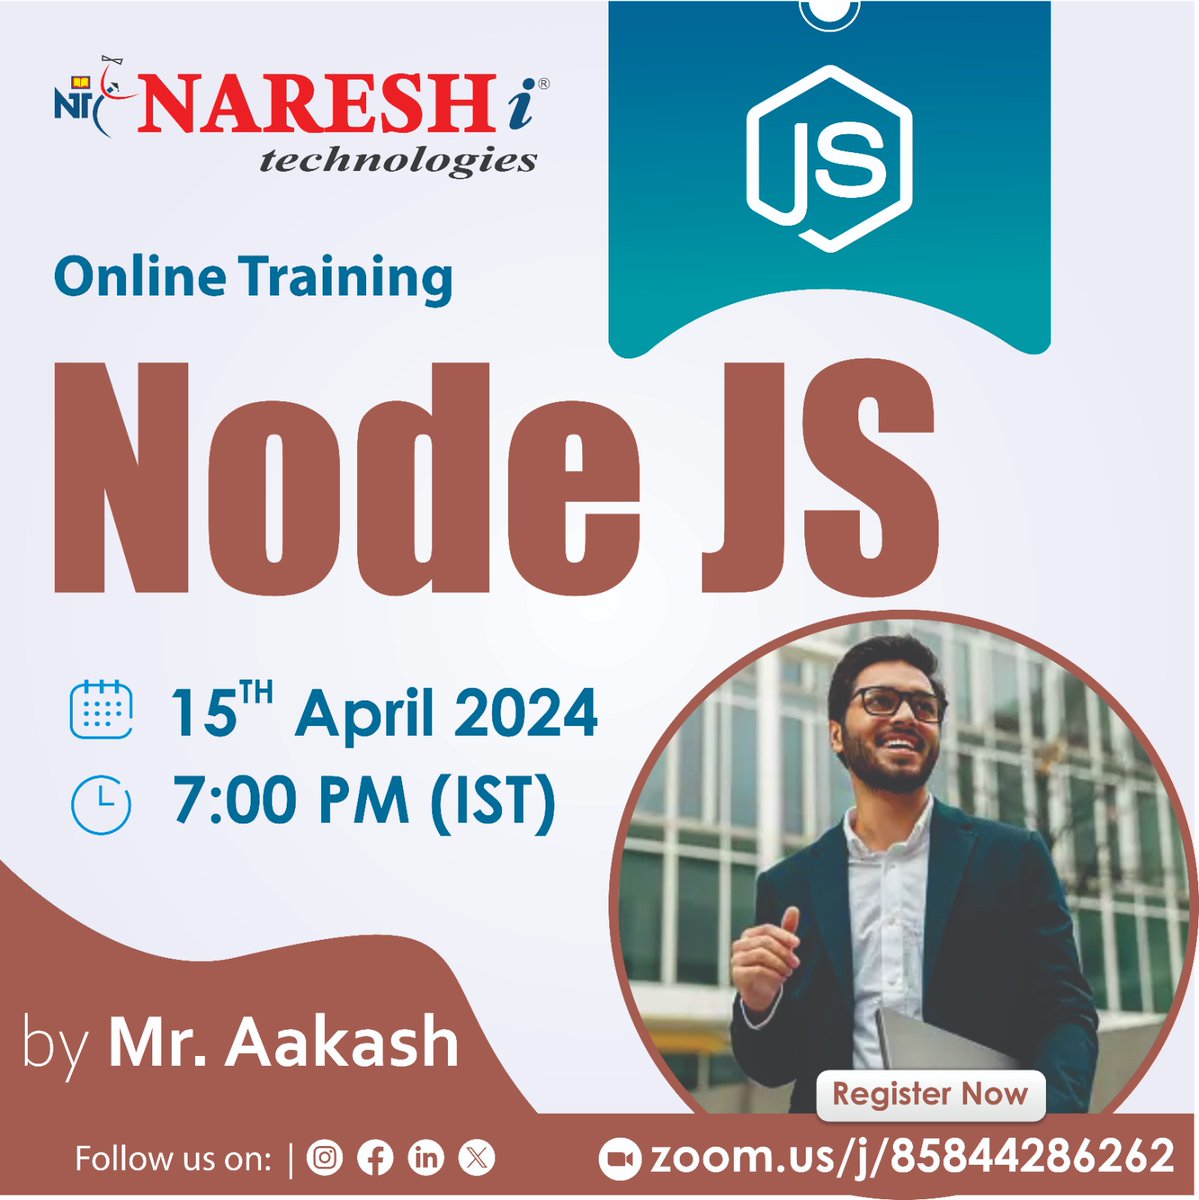 ✍️Enroll Now: bit.ly/43RIHGP
👉Attend a Free Demo On Node JS by Mr.Aakash.
📅Demo on: 15th April @ 7:00 PM (IST).

For More Details:
🌐Visit: nareshit.com/new-batches

#Nodejs #reactjs #webdevelopment #education #learning #courses #software #it